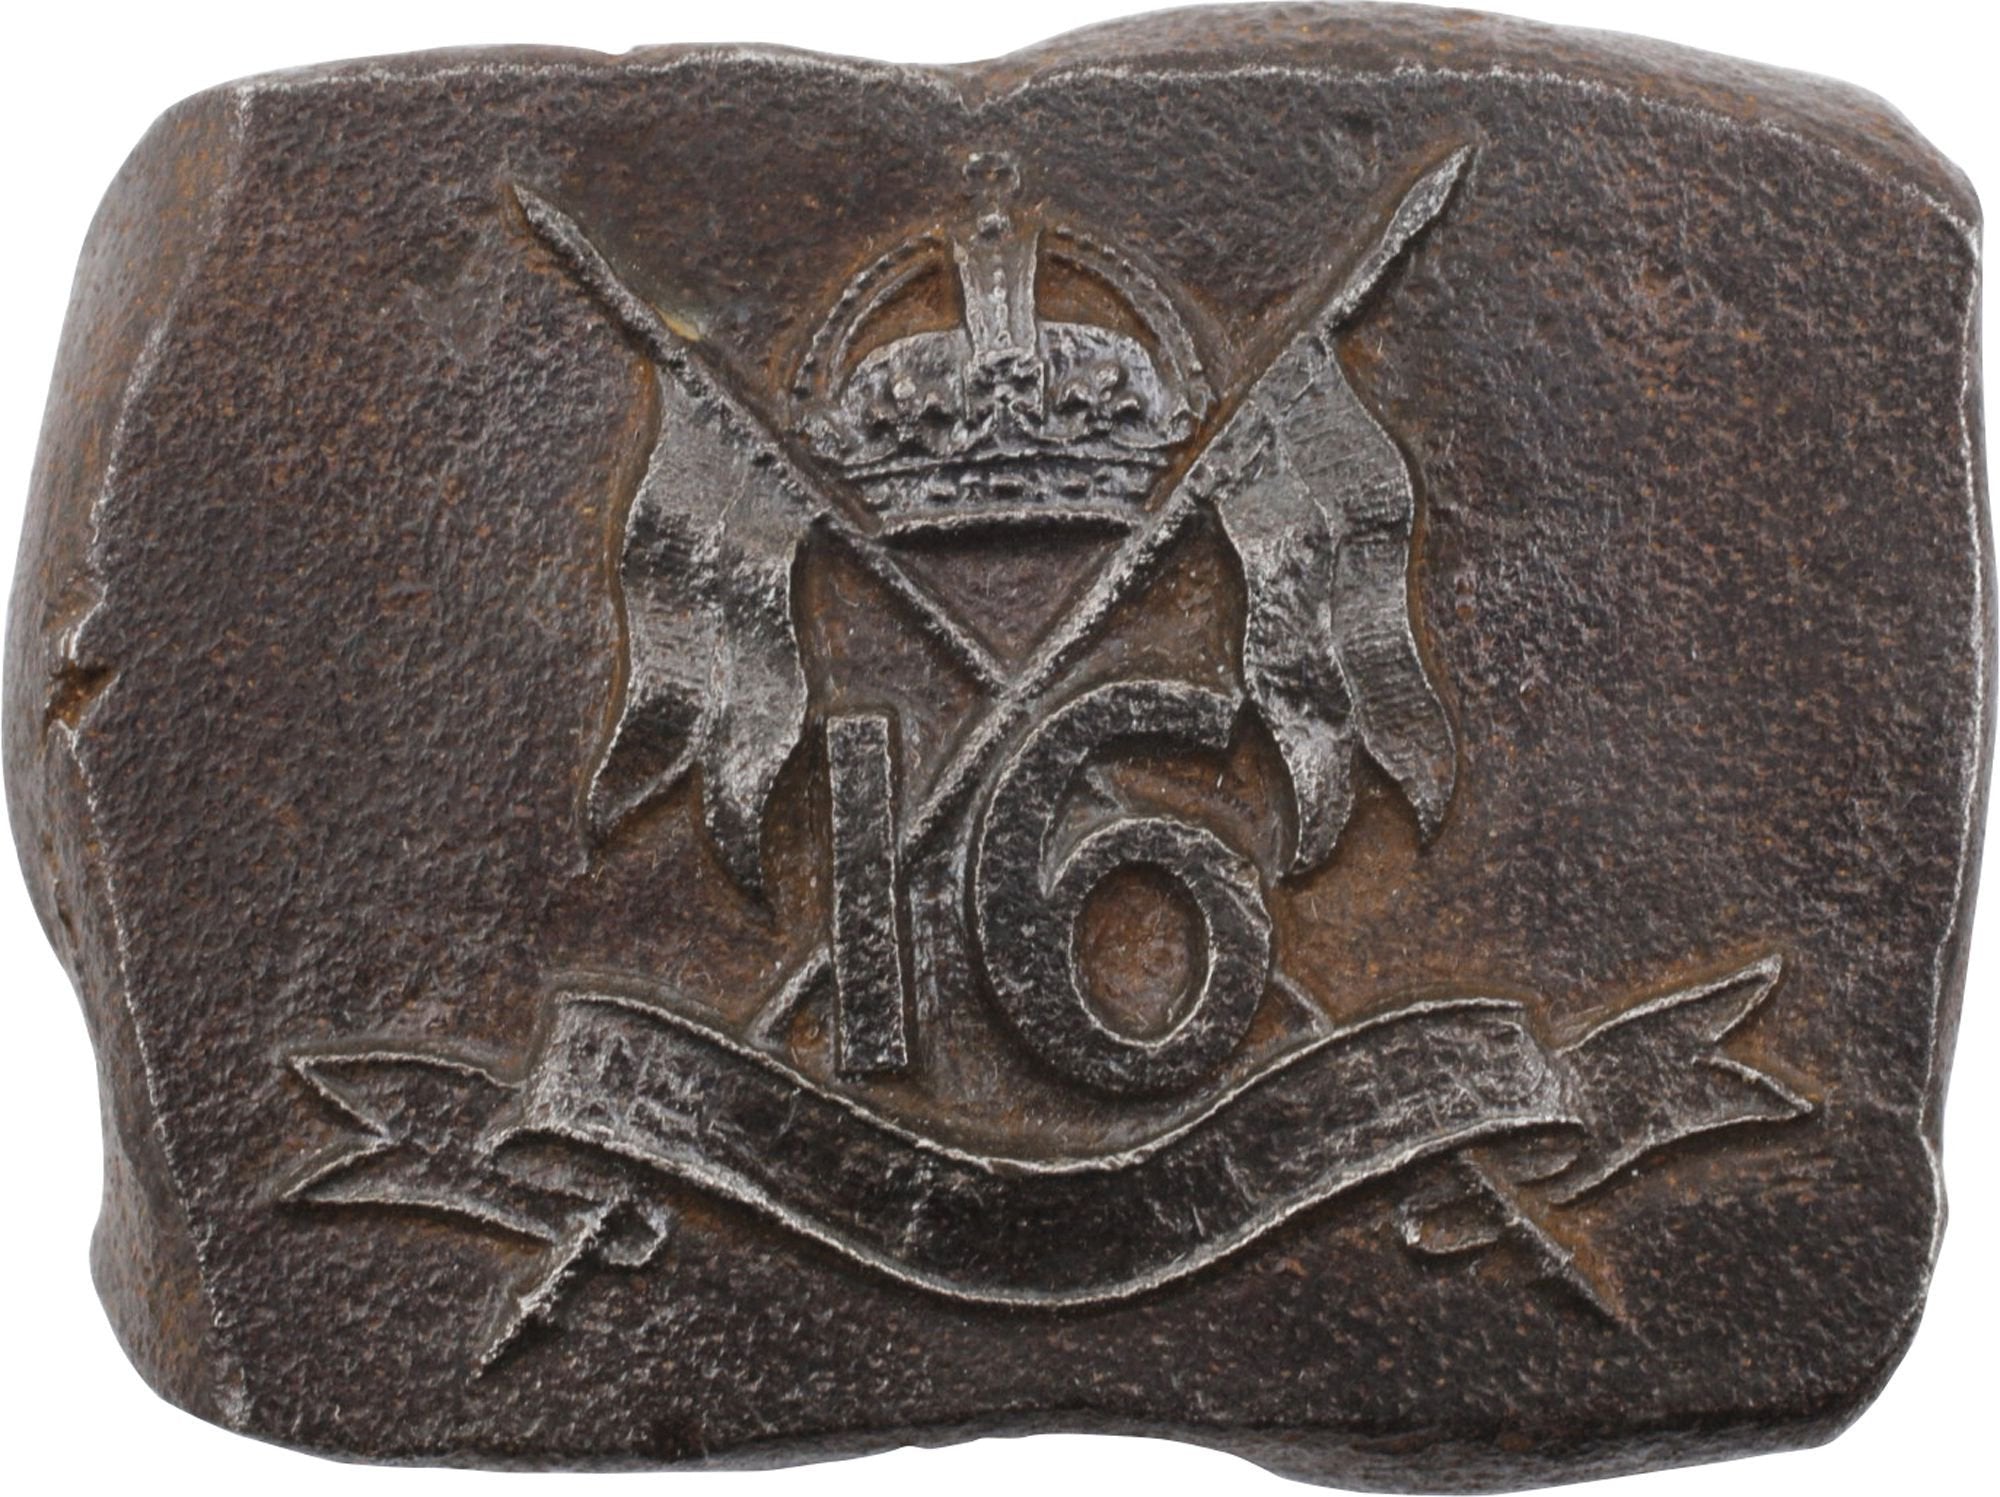 VICTORIAN STEEL DIE TO STRIKE THE HAT BADGE FOR THE BRITISH 16th LANCERS - WAS $275.00, NOW $192.50 - Fagan Arms